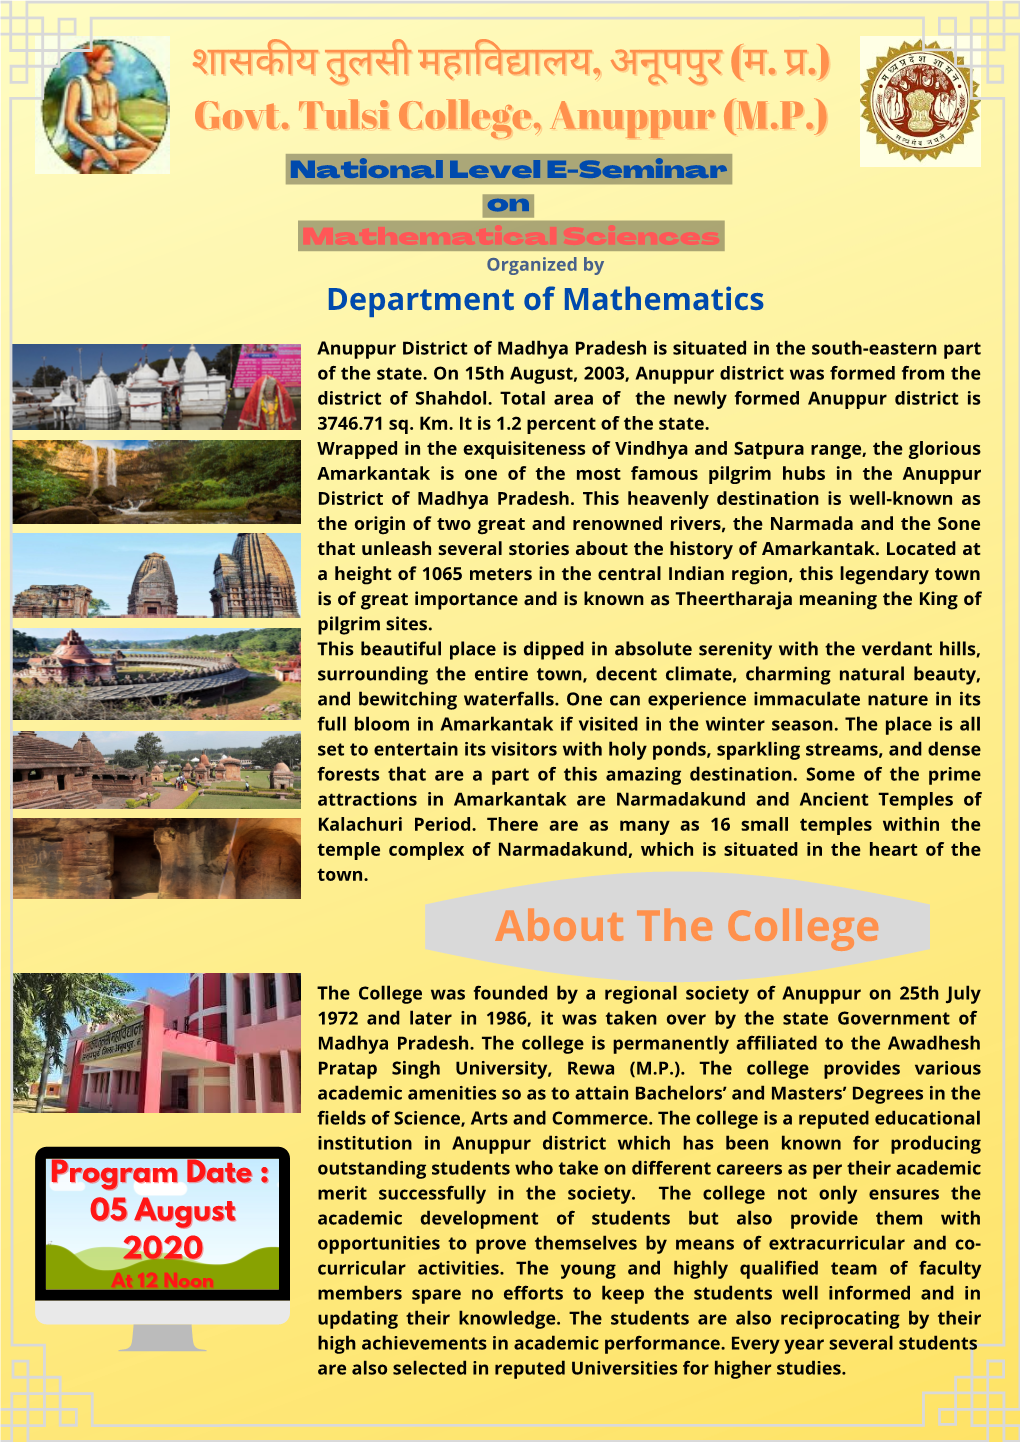 National Level E-Seminar on Mathematical Sciences Organized by Department of Mathematics